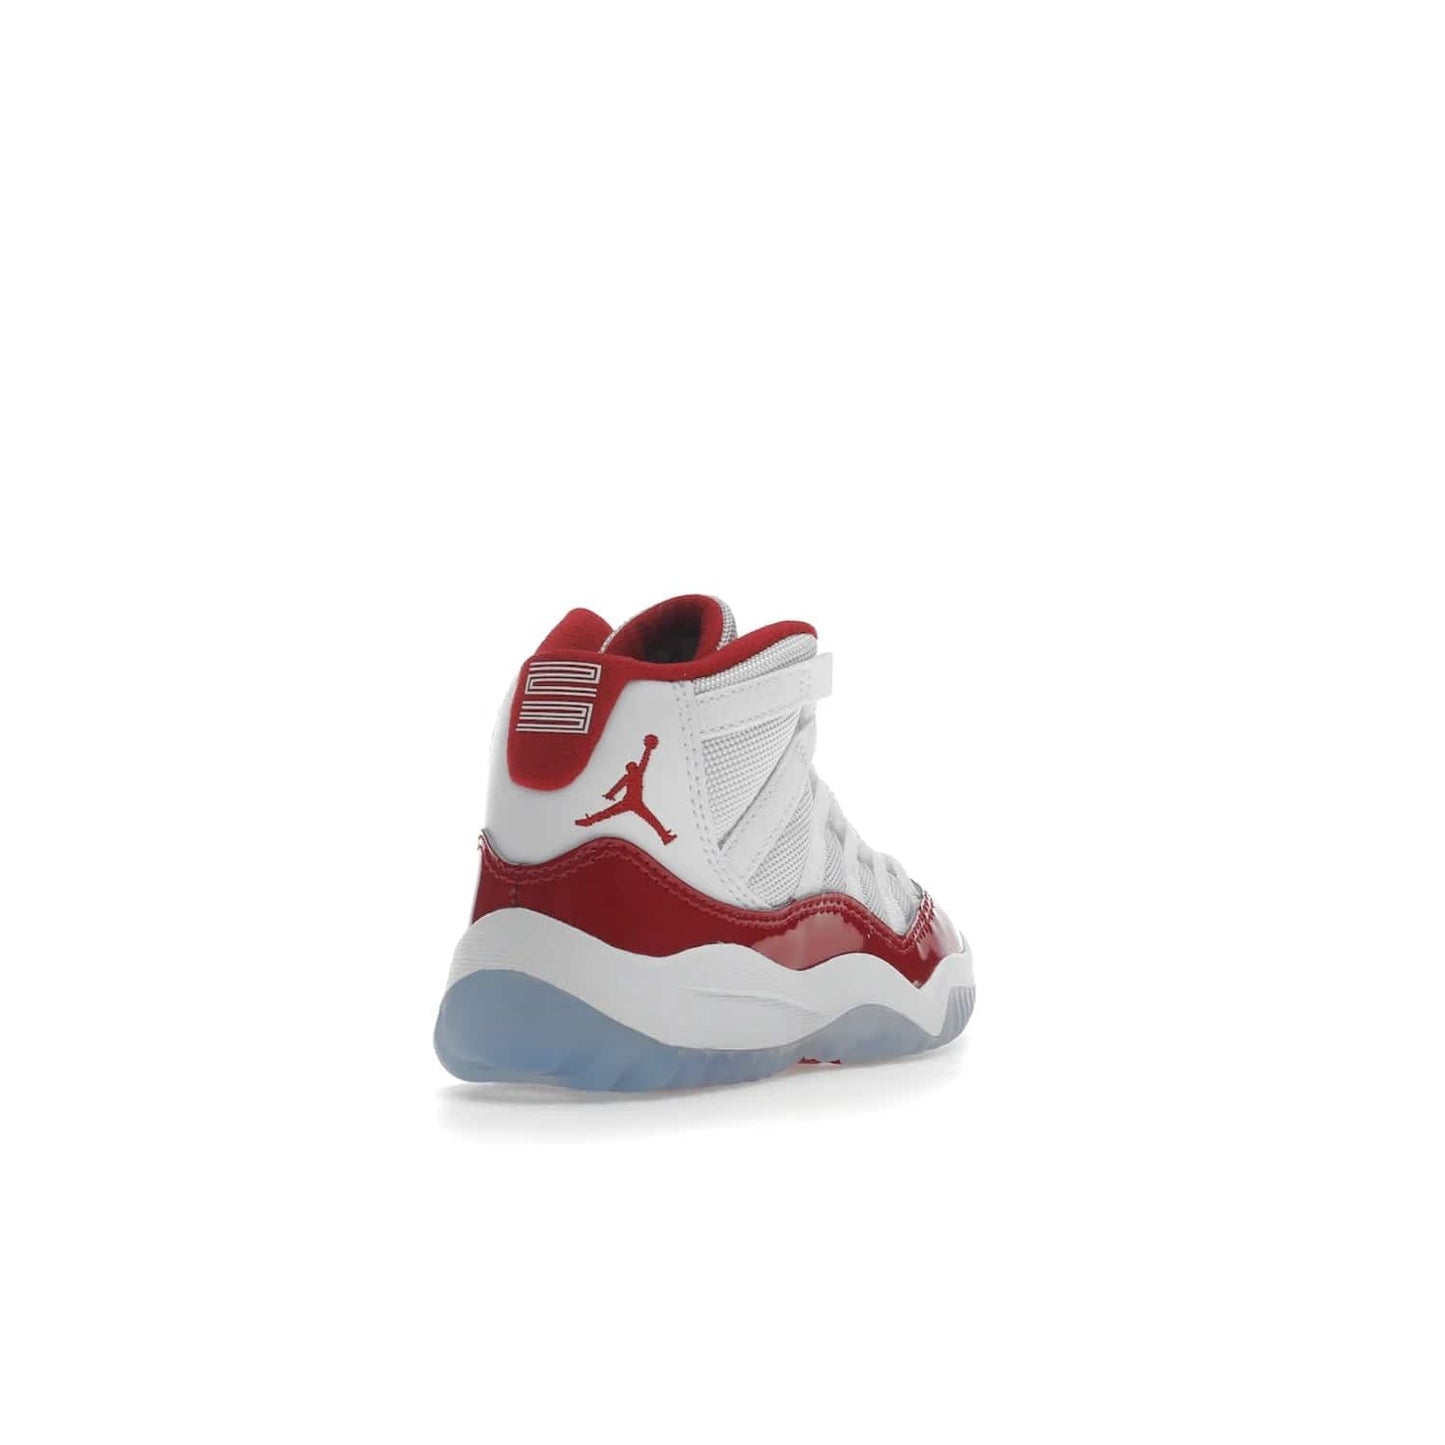 Jordan 11 Retro Cherry (2022) (PS) - Image 31 - Only at www.BallersClubKickz.com - An iconic silhouette with a timeless look, the Air Jordan 11 Retro Cherry 2022 PS features a crisp White, Varsity Red and Black colorway. The upper is made of ballistic mesh, a red patent leather mudguard, '23' branding and white Phylon midsole. Get optimal cushioning and comfort on December 10th, 2022. Don't miss out.